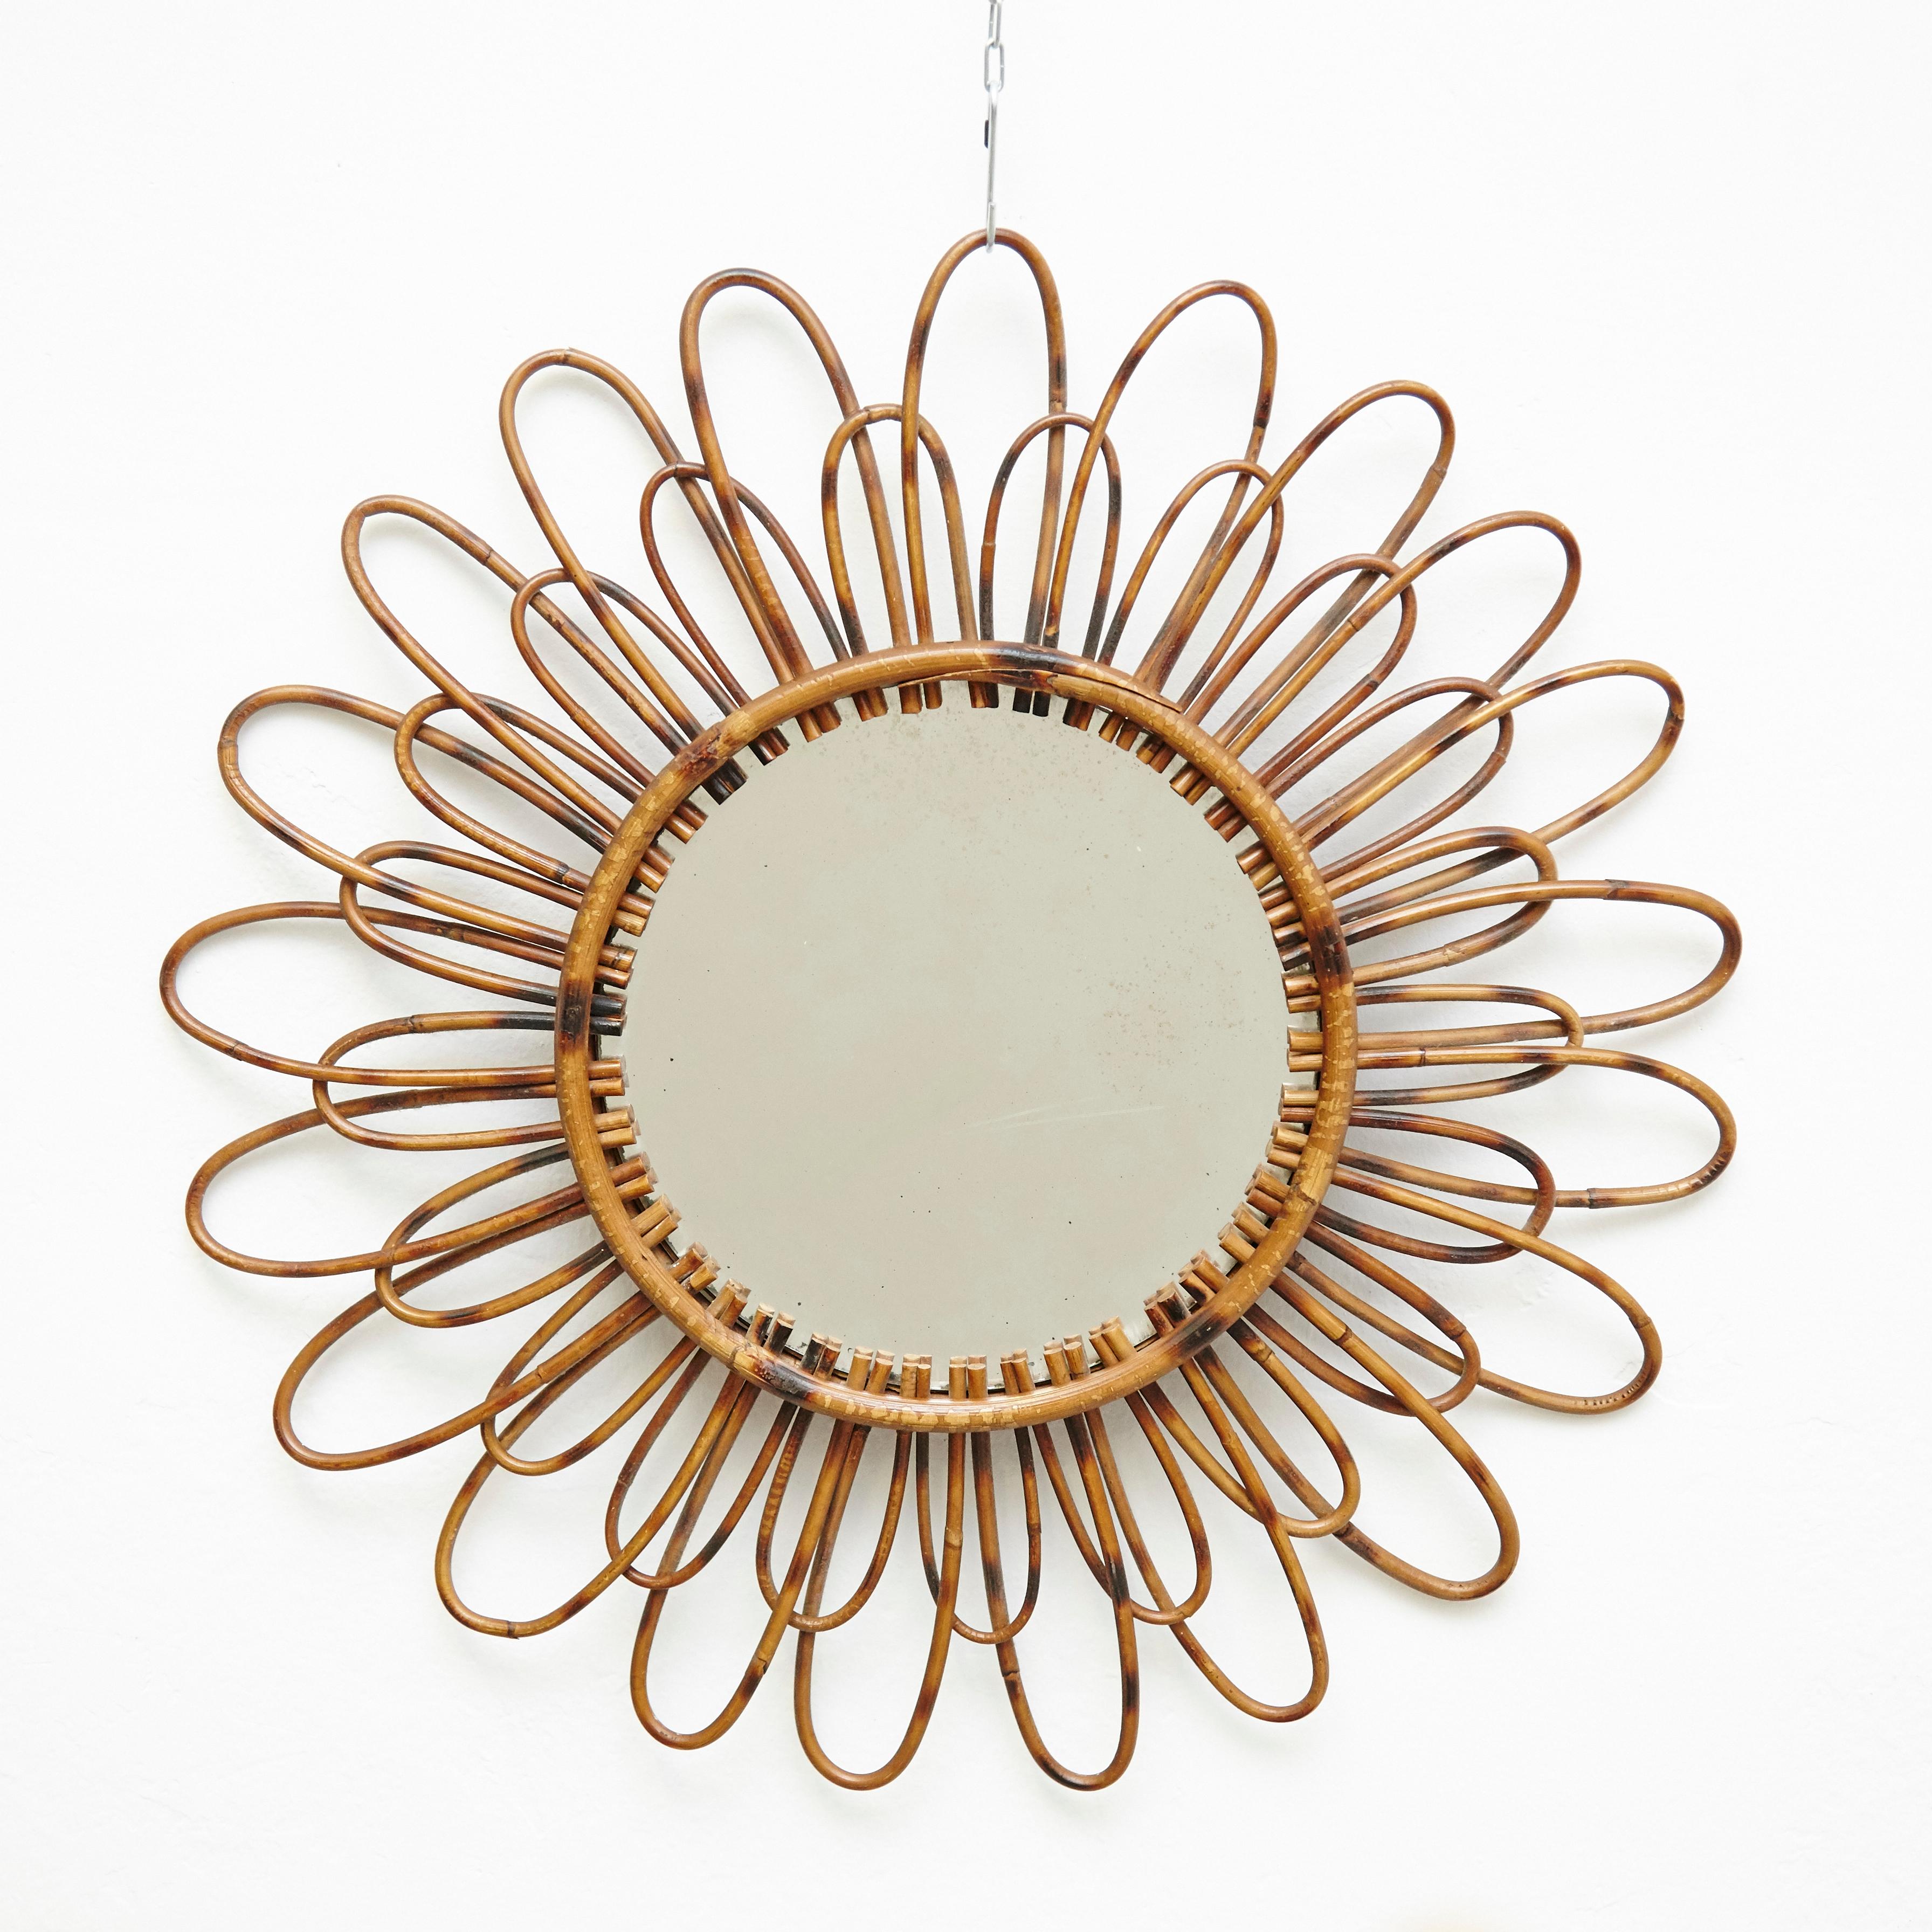 Mid-Century Modern French handcrafted rattan wall mirror.
By unknown artisan, circa 1960.
In original condition, with minor wear consistent with age and use, preserving a beautiful patina.

Materials:
Mirror
Handcrafted rattan